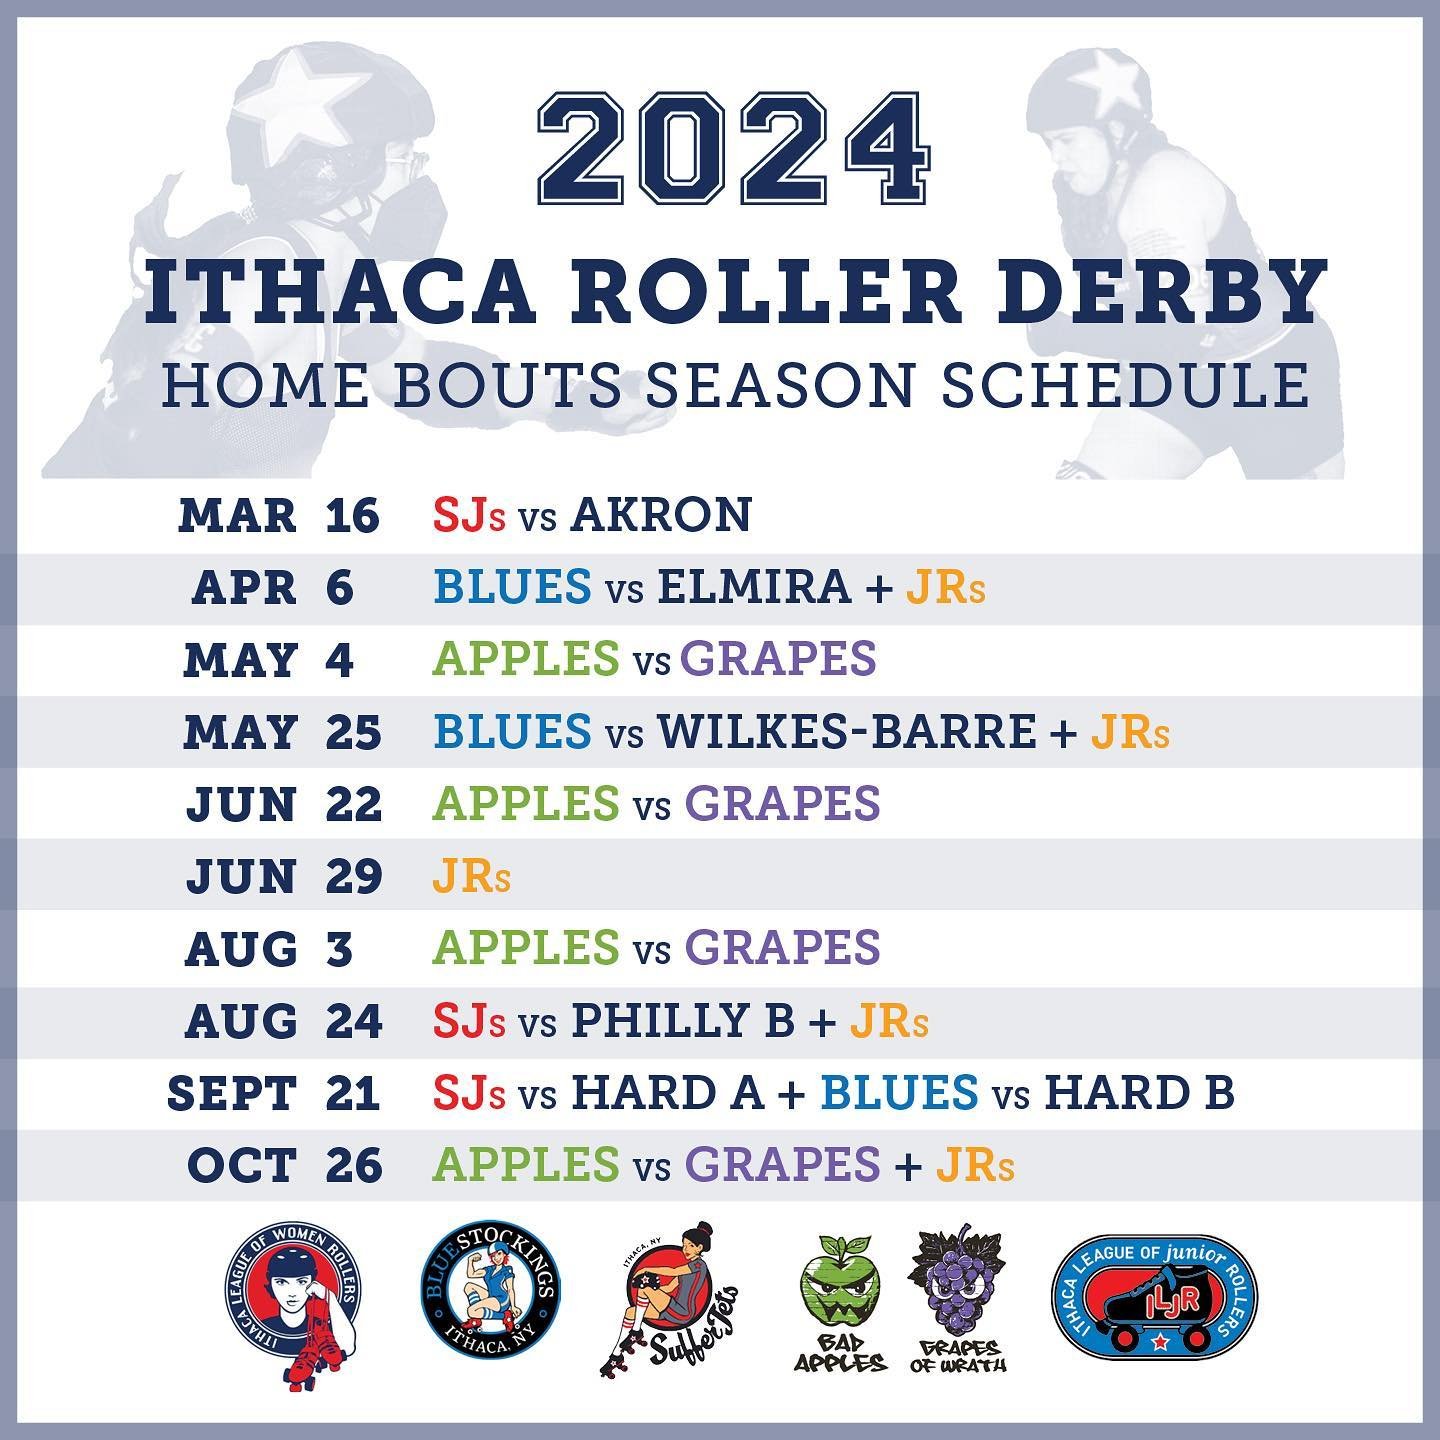 🌟 HOME GAMES GALORE 🌟 Need some derby in your life?? Here&rsquo;s when to come watch! These are all of the games happening this season at 🔥THE MAUL🔥  update your calendars ASAP!! 

Specific bout and ticket details will be posted closer to the eve